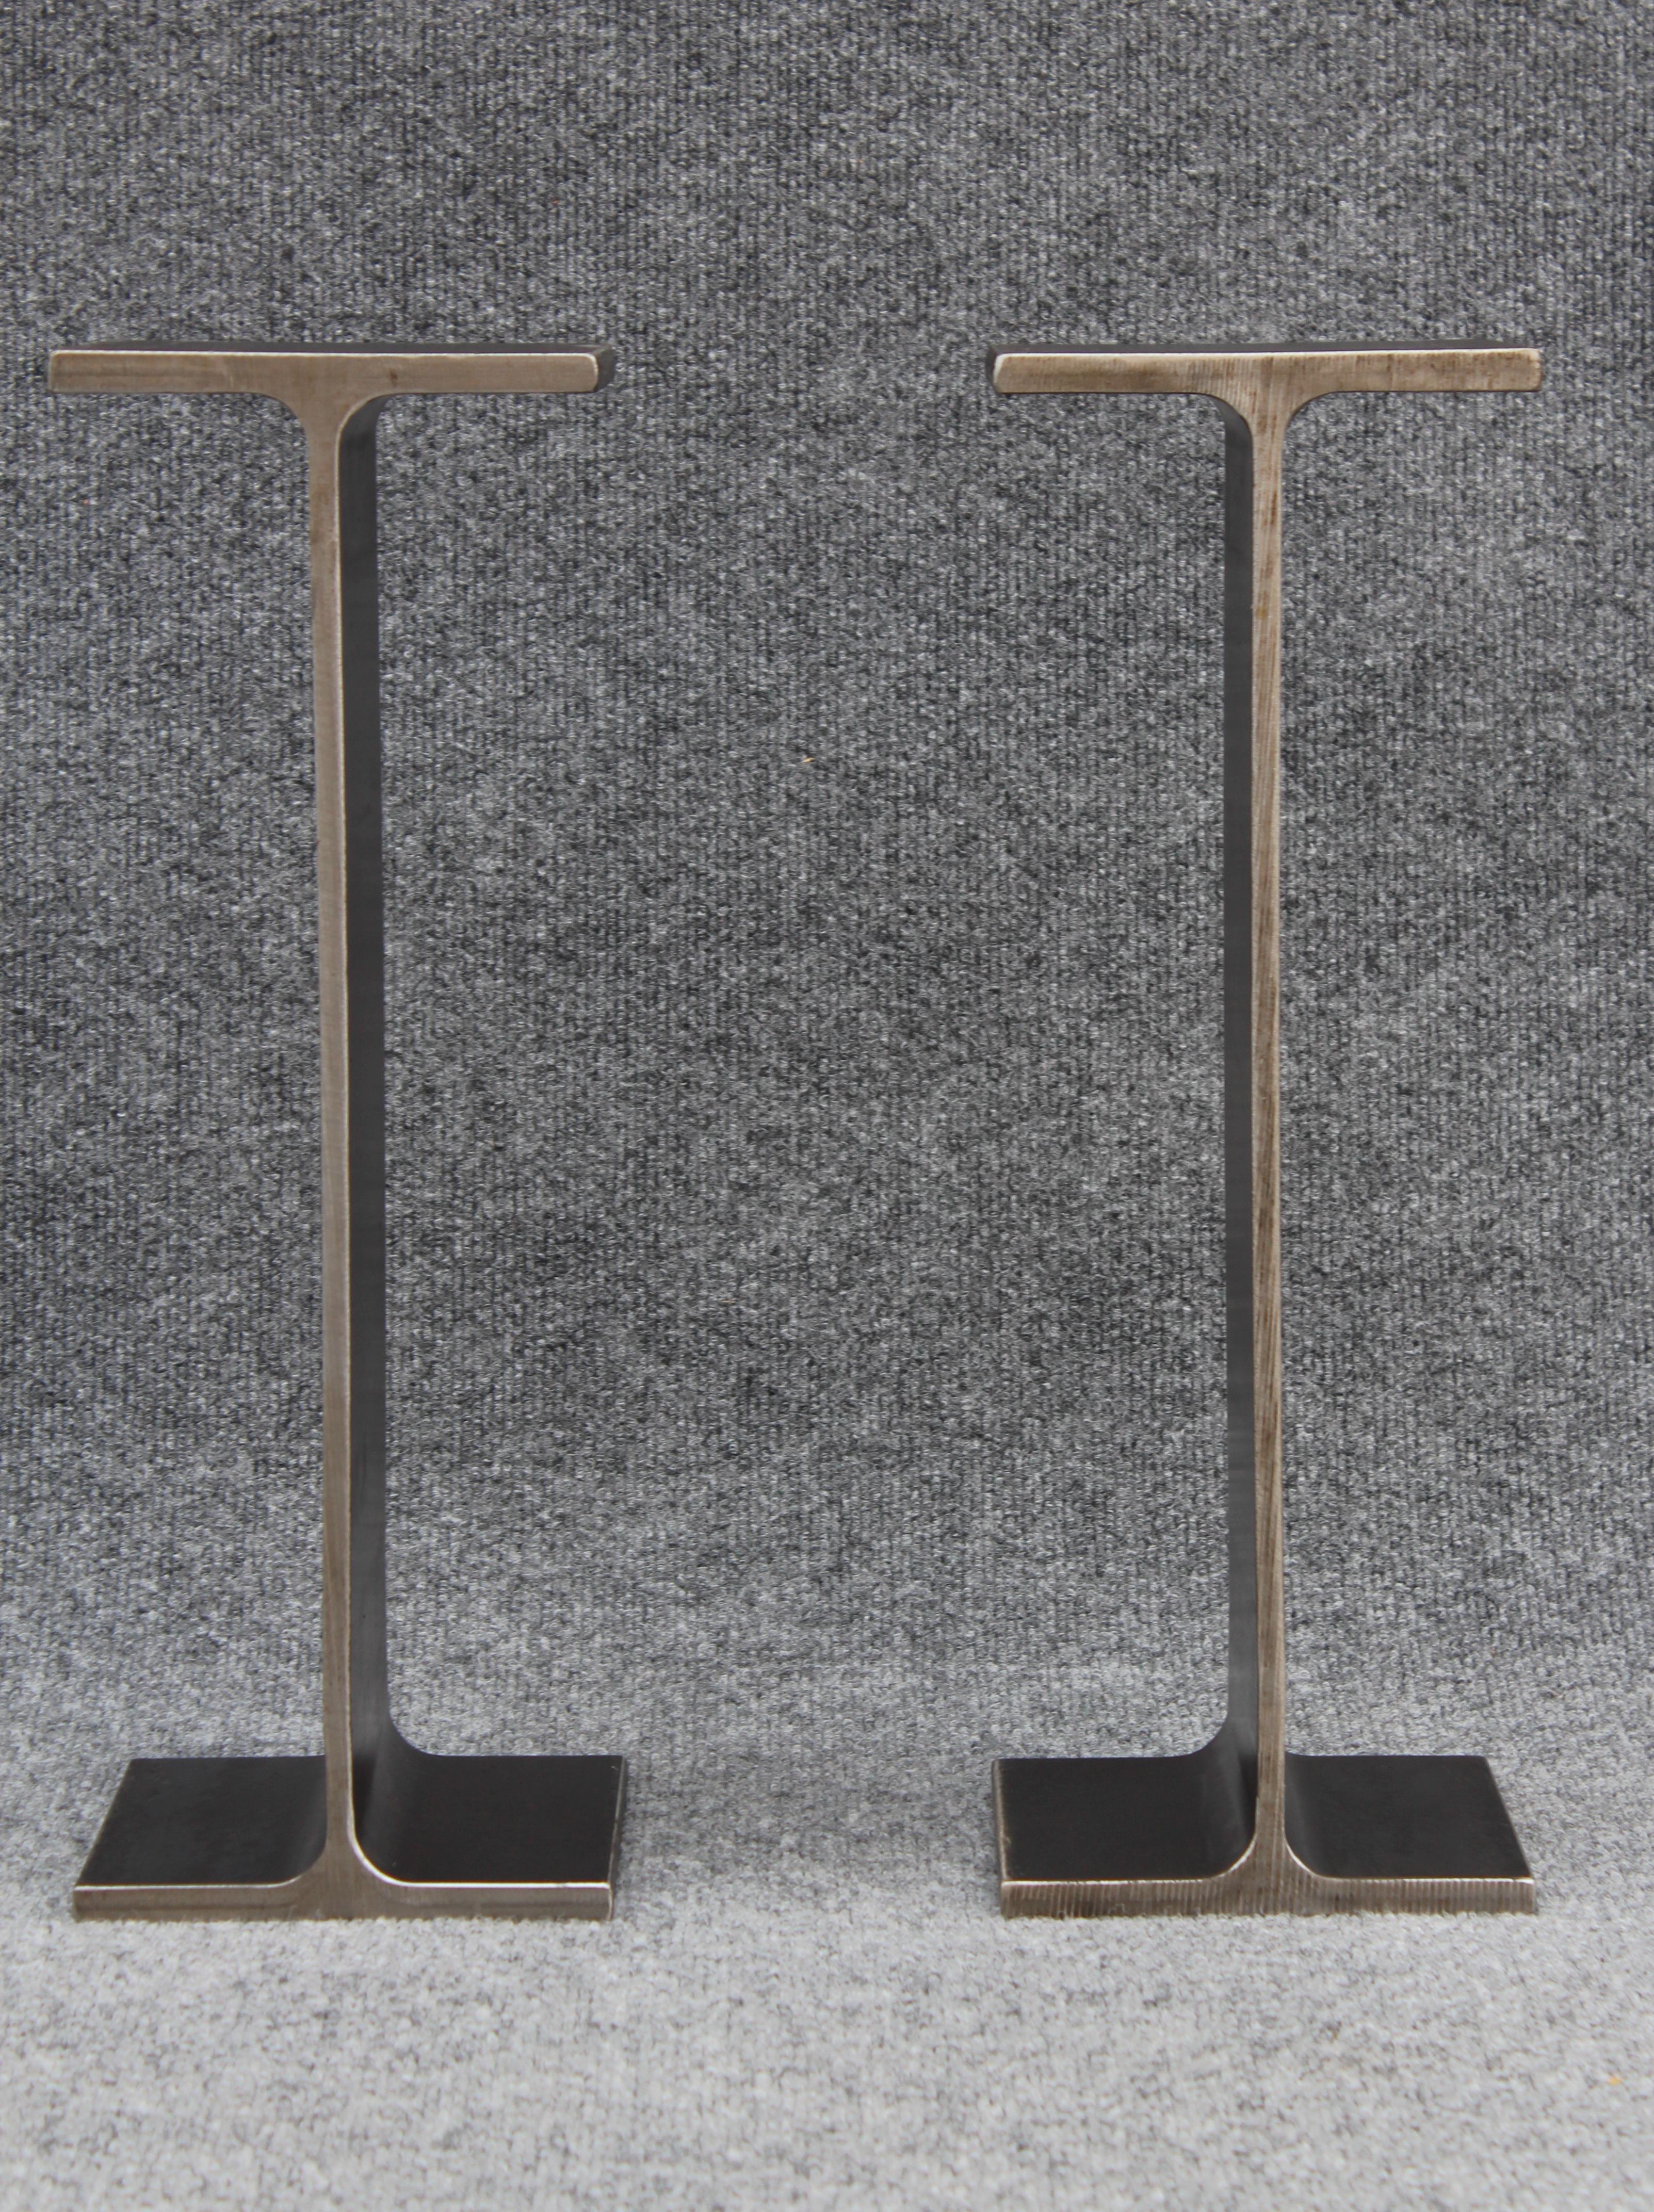 Contemporary Ward Bennett Inspired Pair Enameled Steel I-Beam Drink Stands or End Tables 